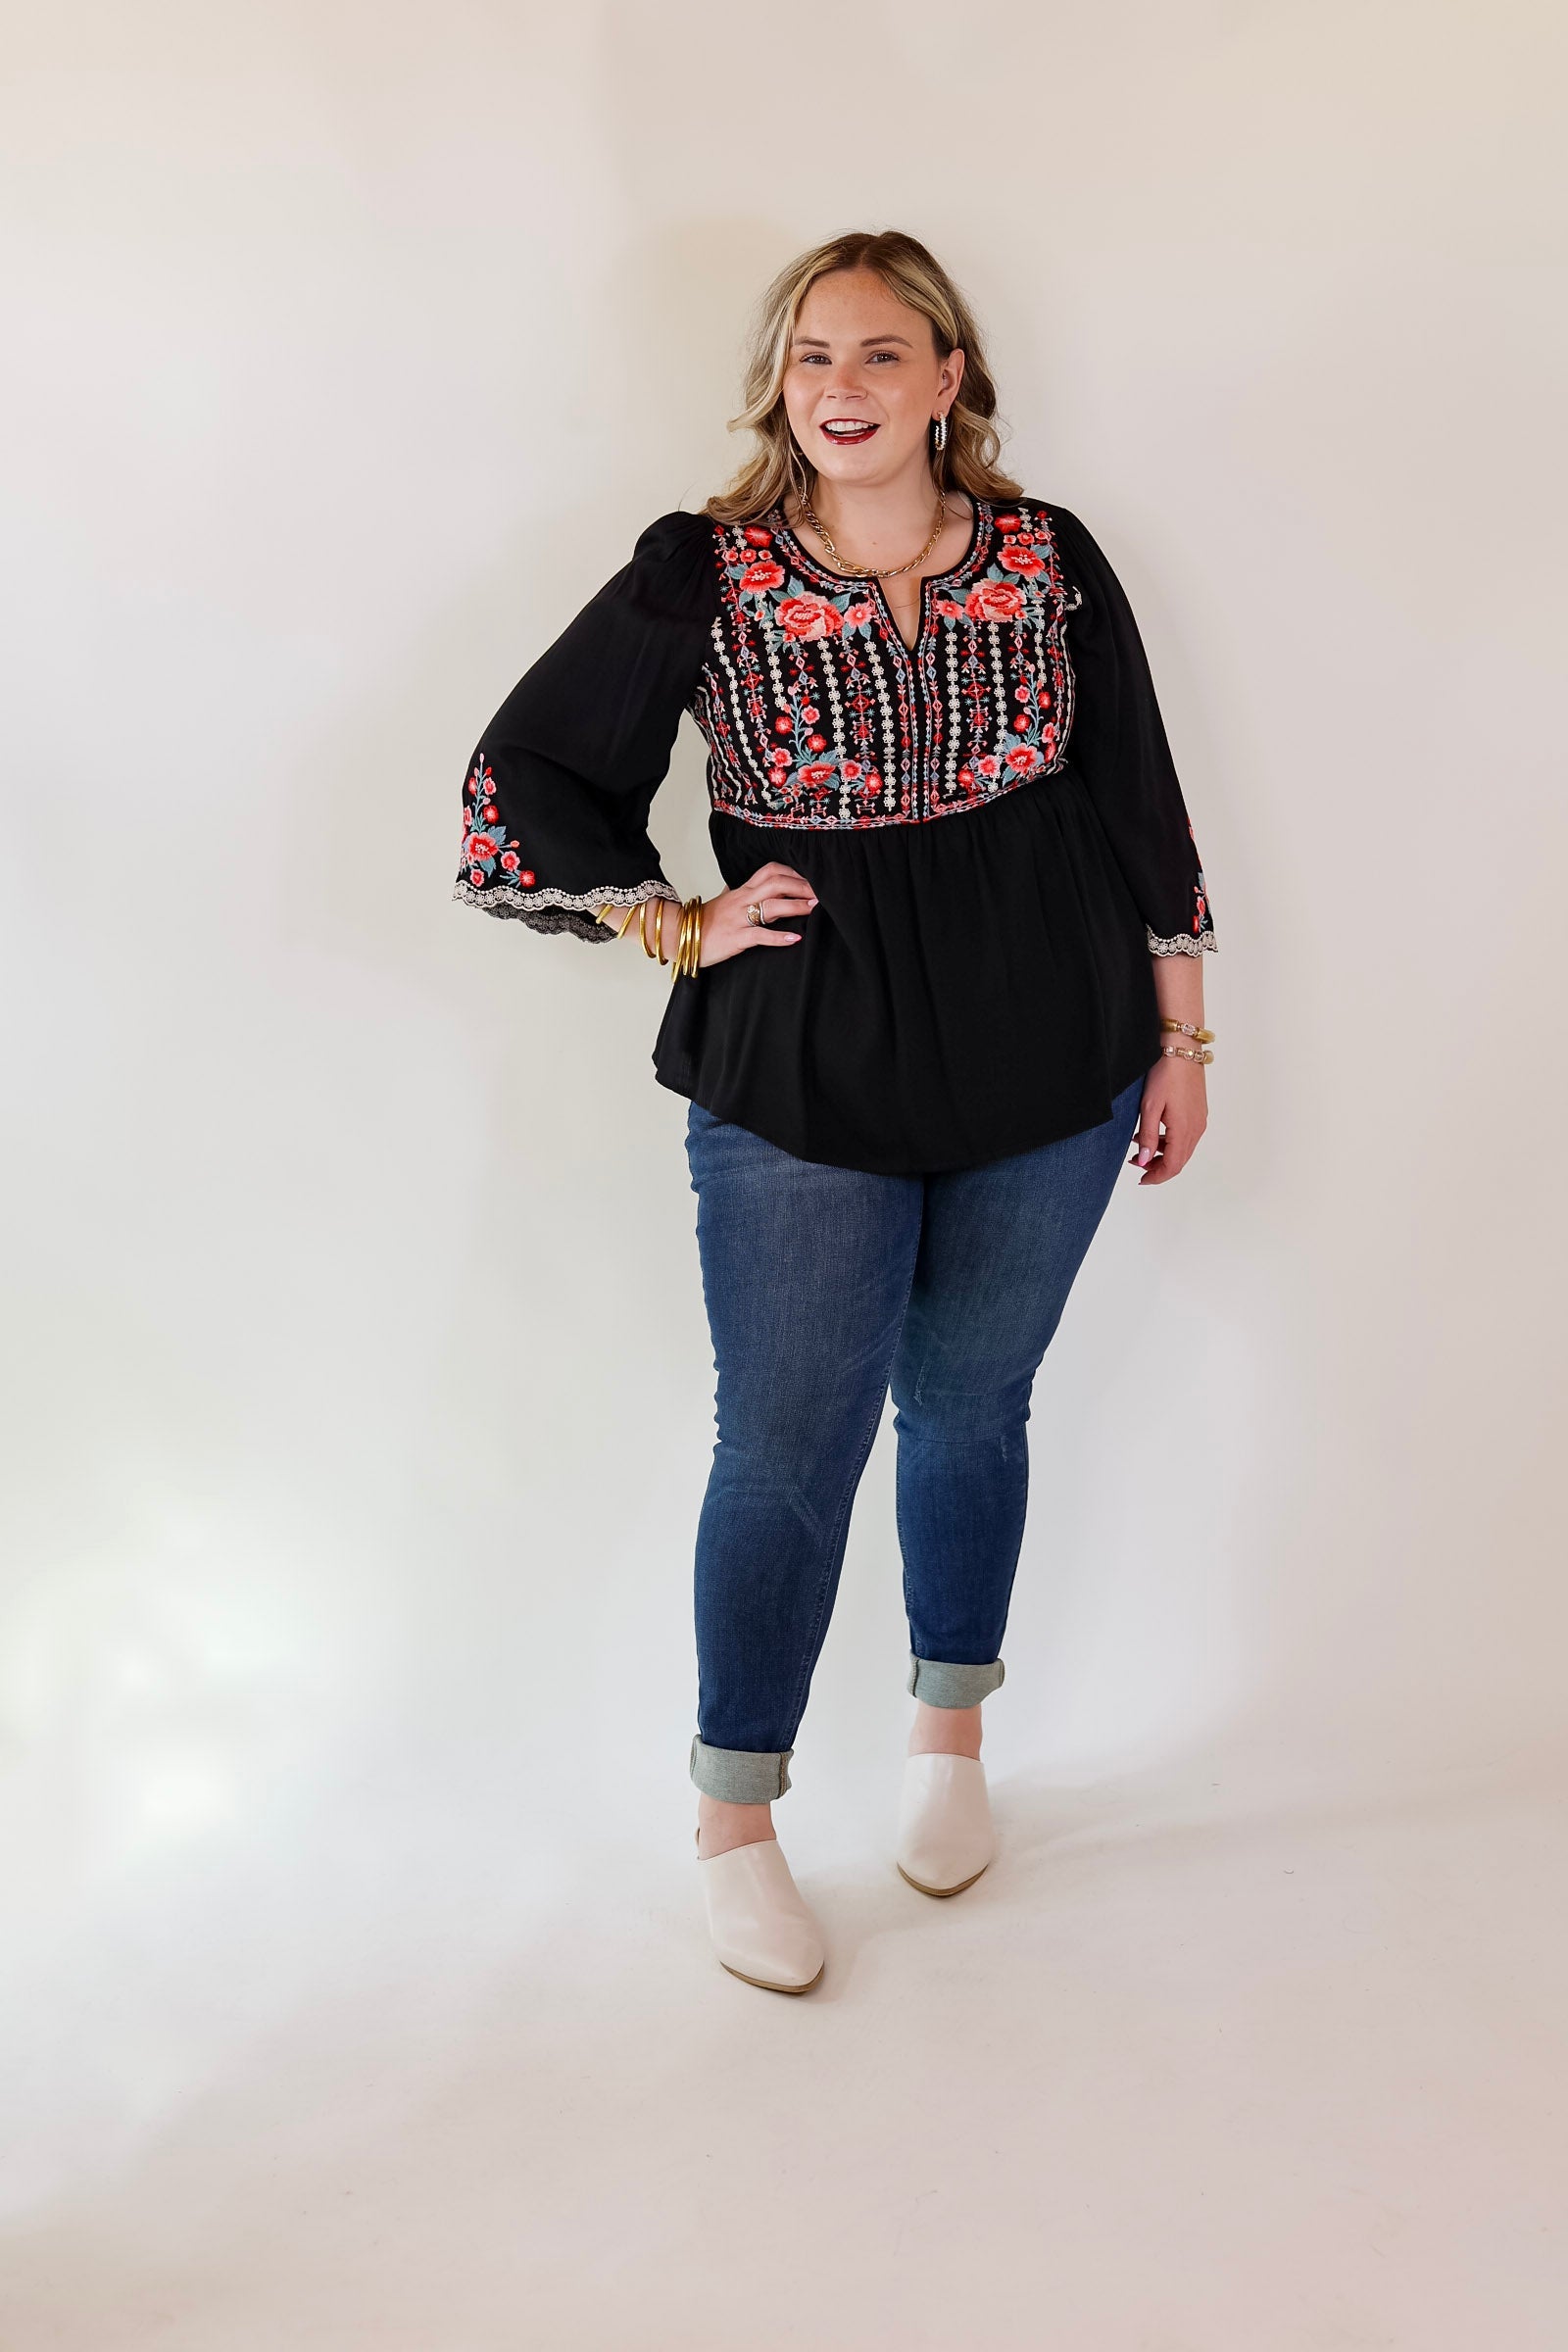 Already Mine 3/4 Bell Sleeve Embroidered Babydoll Top in Black - Giddy Up Glamour Boutique